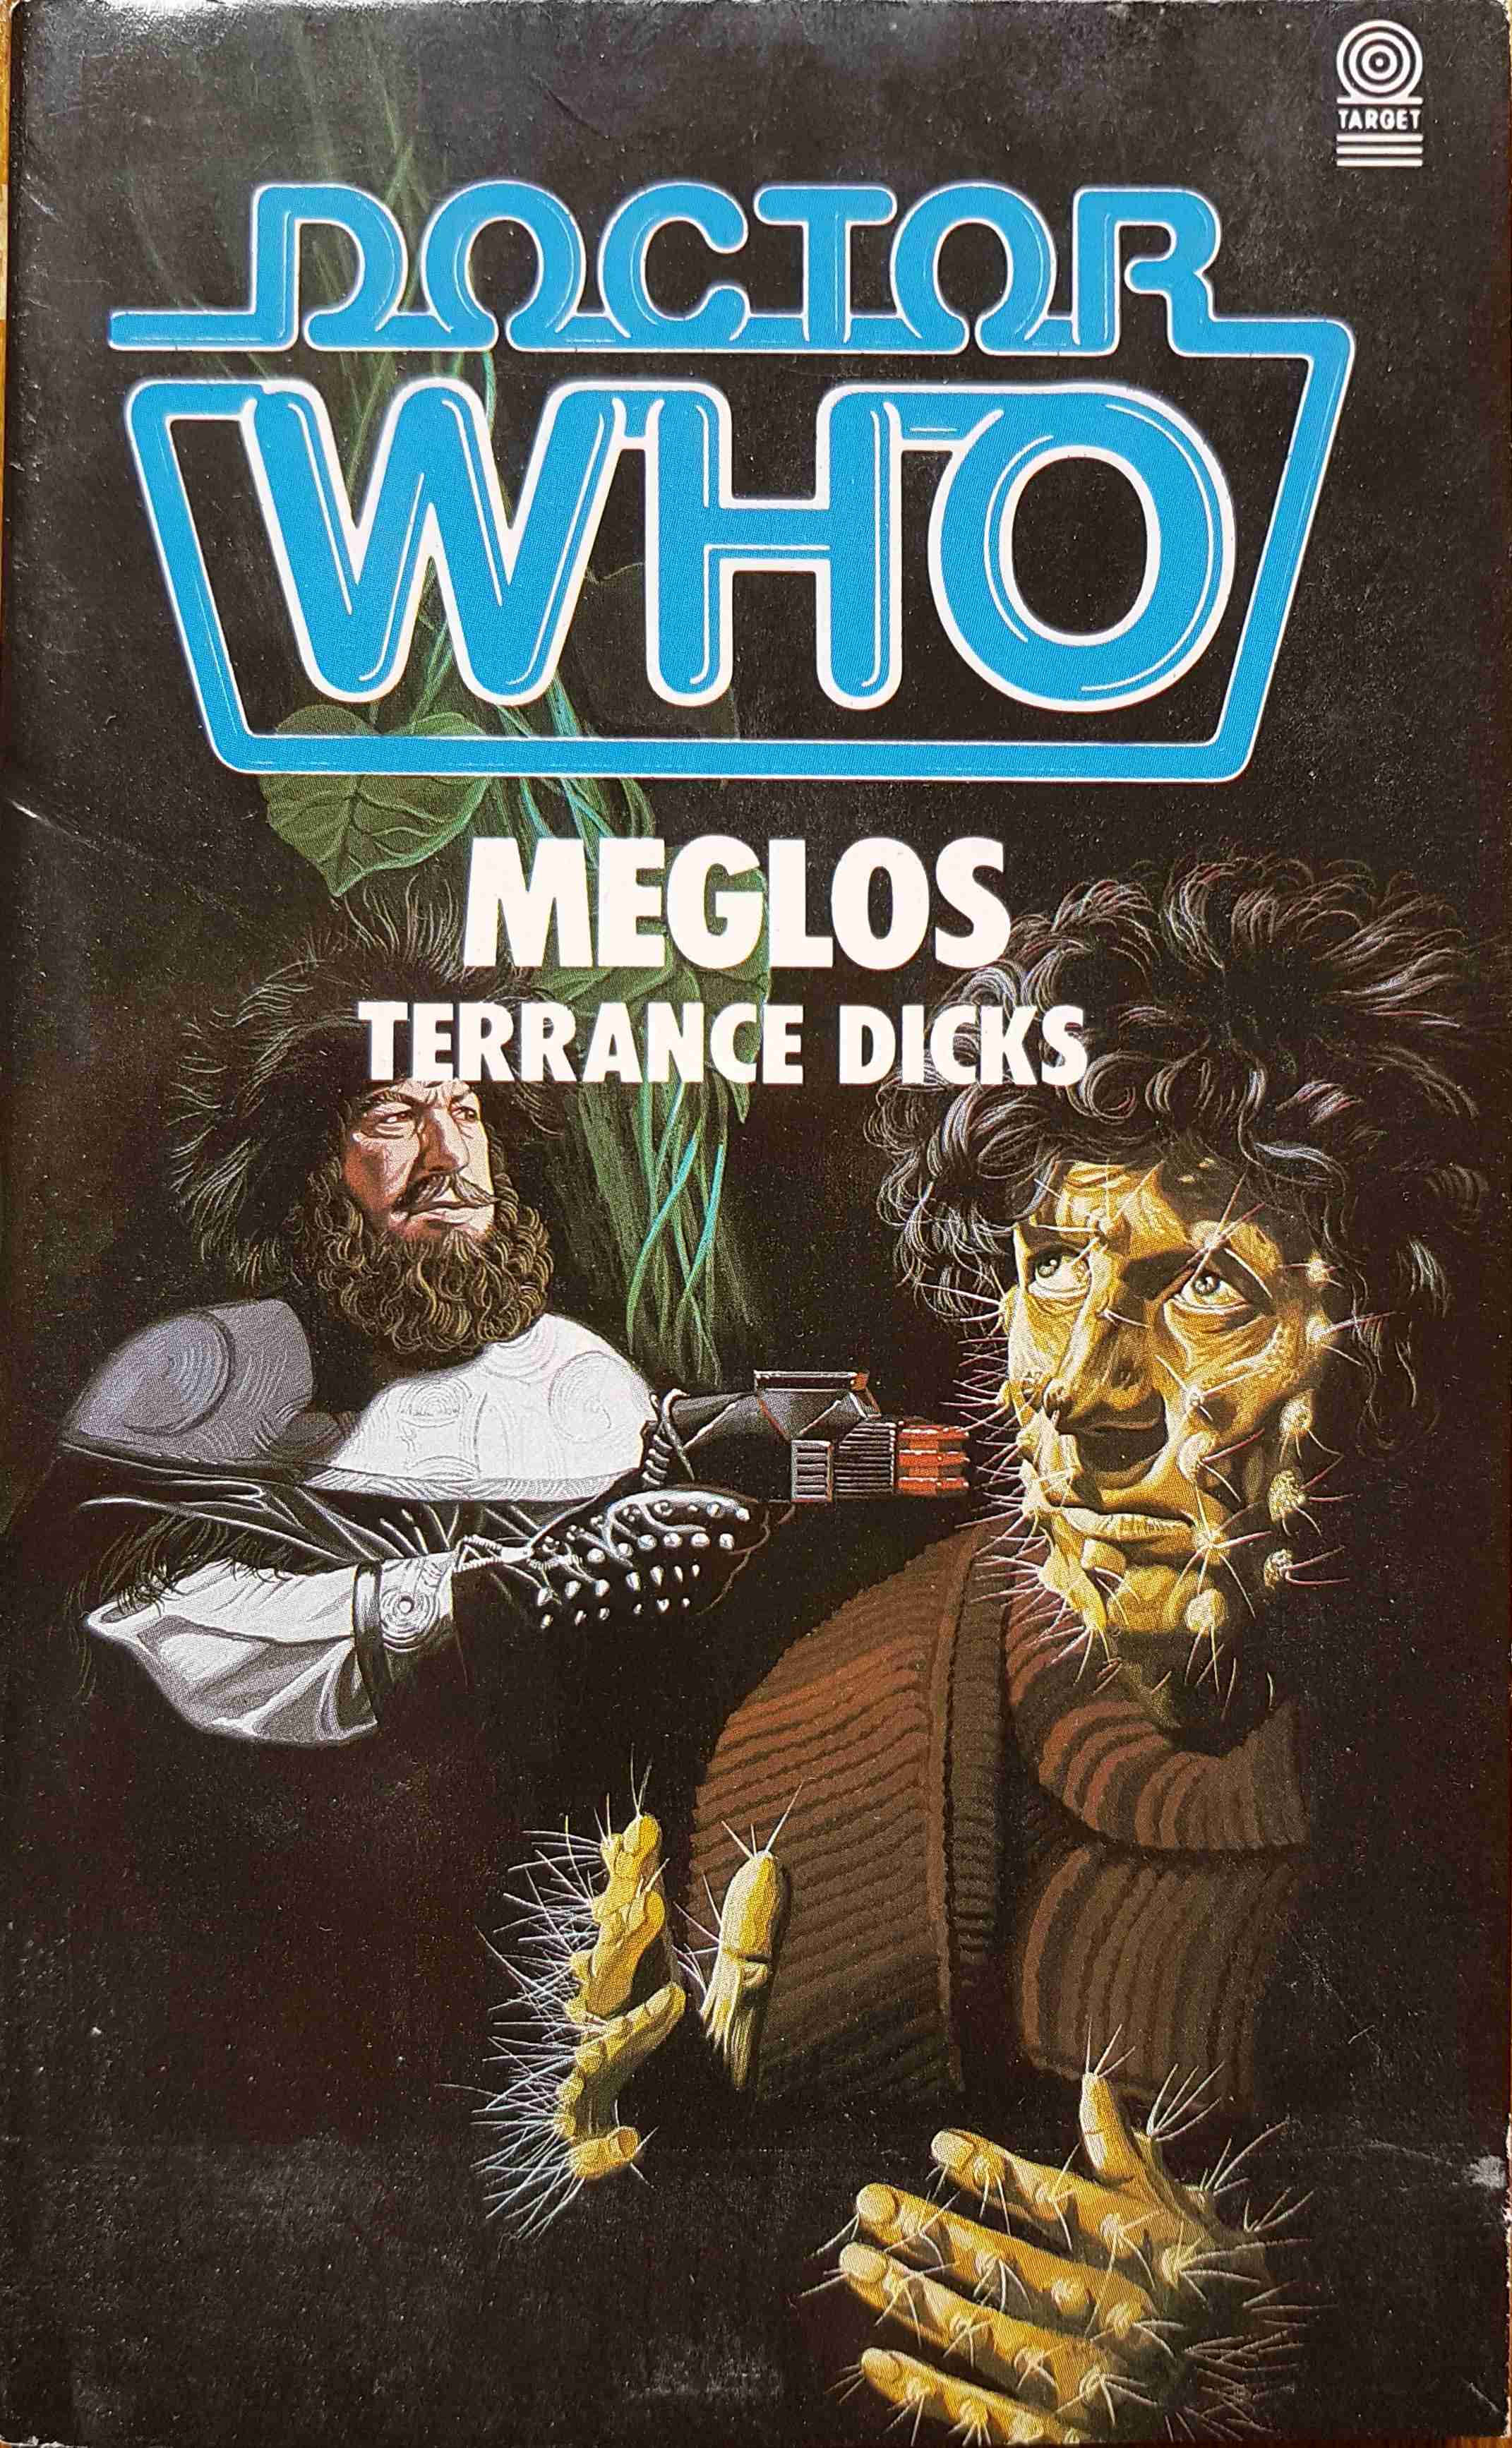 Picture of Doctor Who - Meglos by artist Terrance Dicks from the BBC books - Records and Tapes library